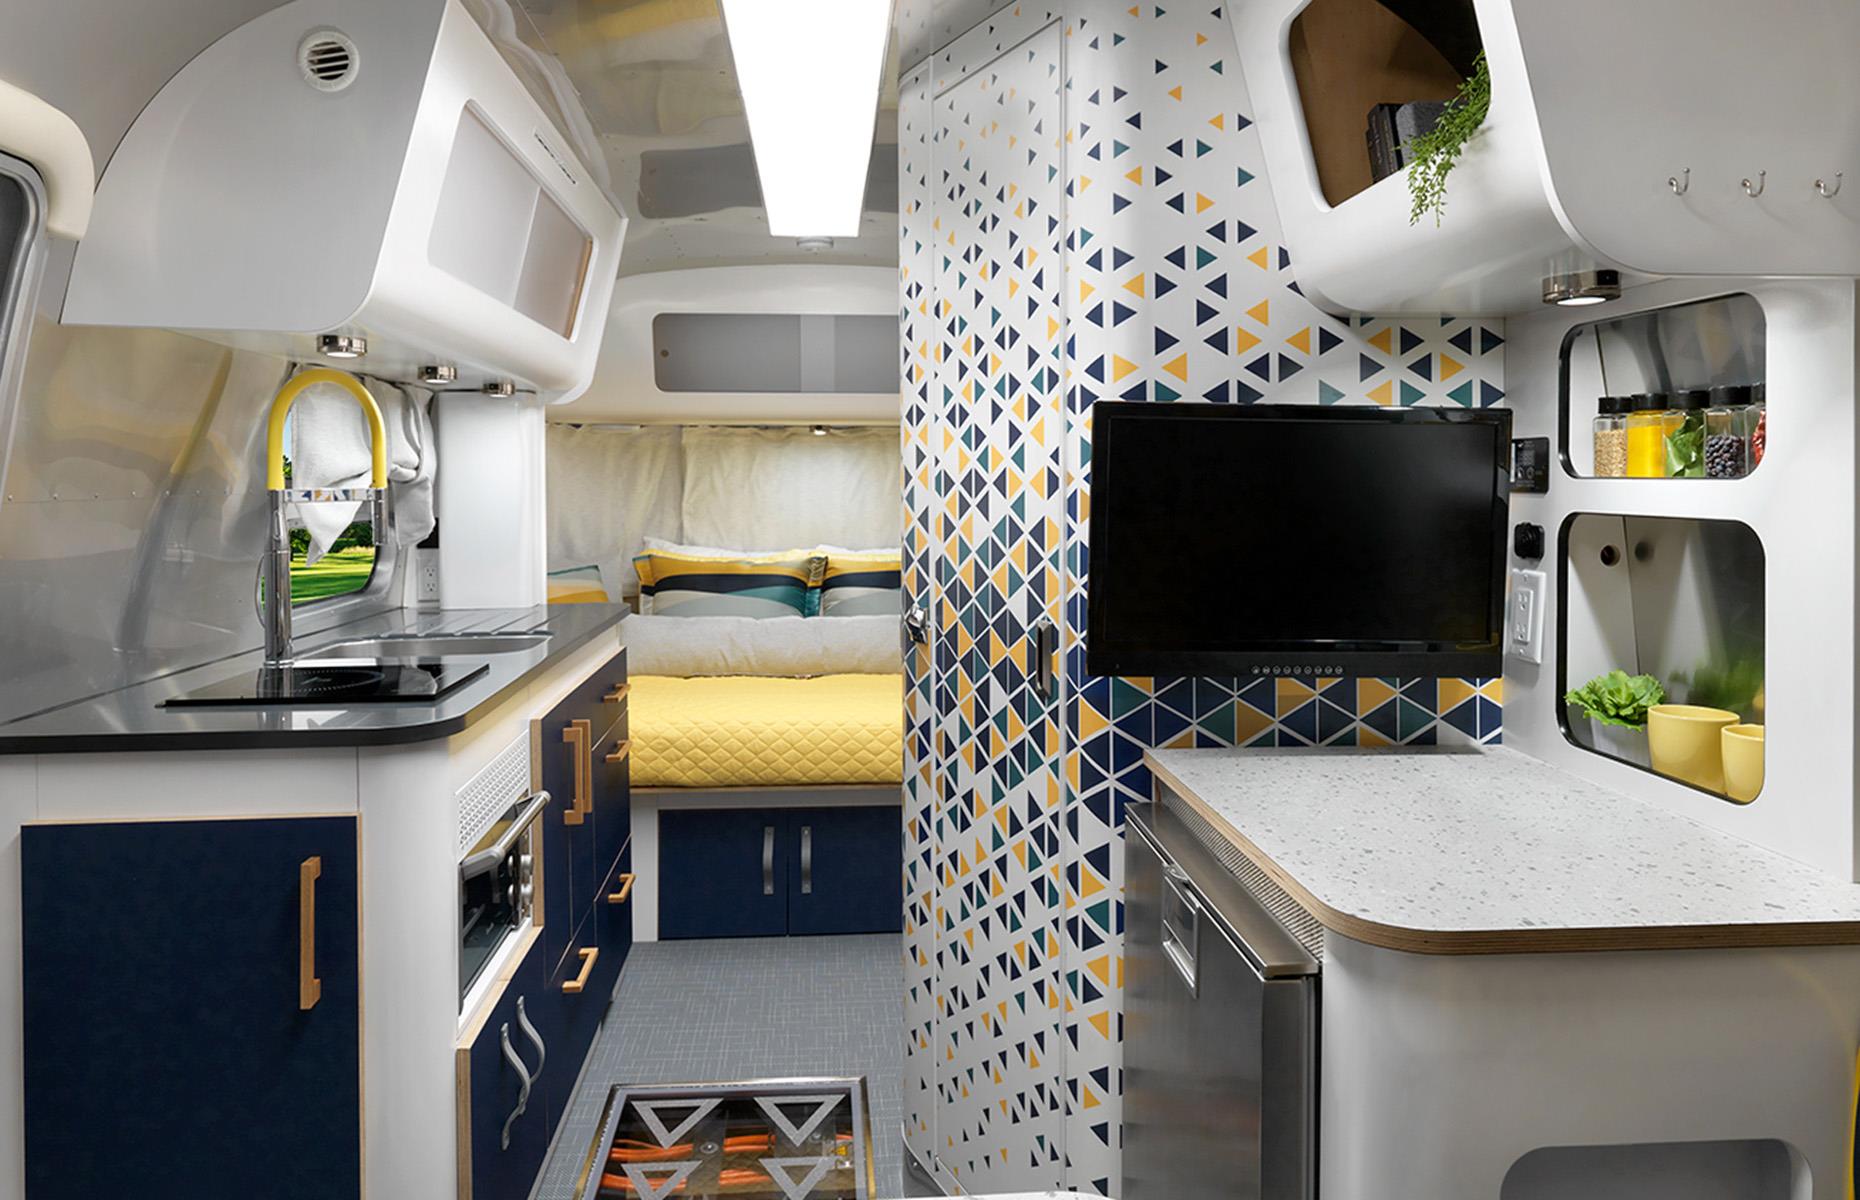 <p>In February 2022, the company <a href="https://www.airstream.com/air-lab/concepts/estream/">announced</a> the research and development of their brand new concept: the eStream, a fully electric and innovative new RV model that's designed to be better for the environment, with cutting-edge technology using a battery-powered drivetrain. It will have a rear-bed and a convertible dining area and the total floor plan is set to be 22 feet long (6.7m). </p>  <p><a href="https://www.loveexploring.com/galleries/97825/common-rv-mistakes-and-how-to-avoid-them?page=1"><strong>Here's how to avoid these common RV mistakes</strong></a></p>